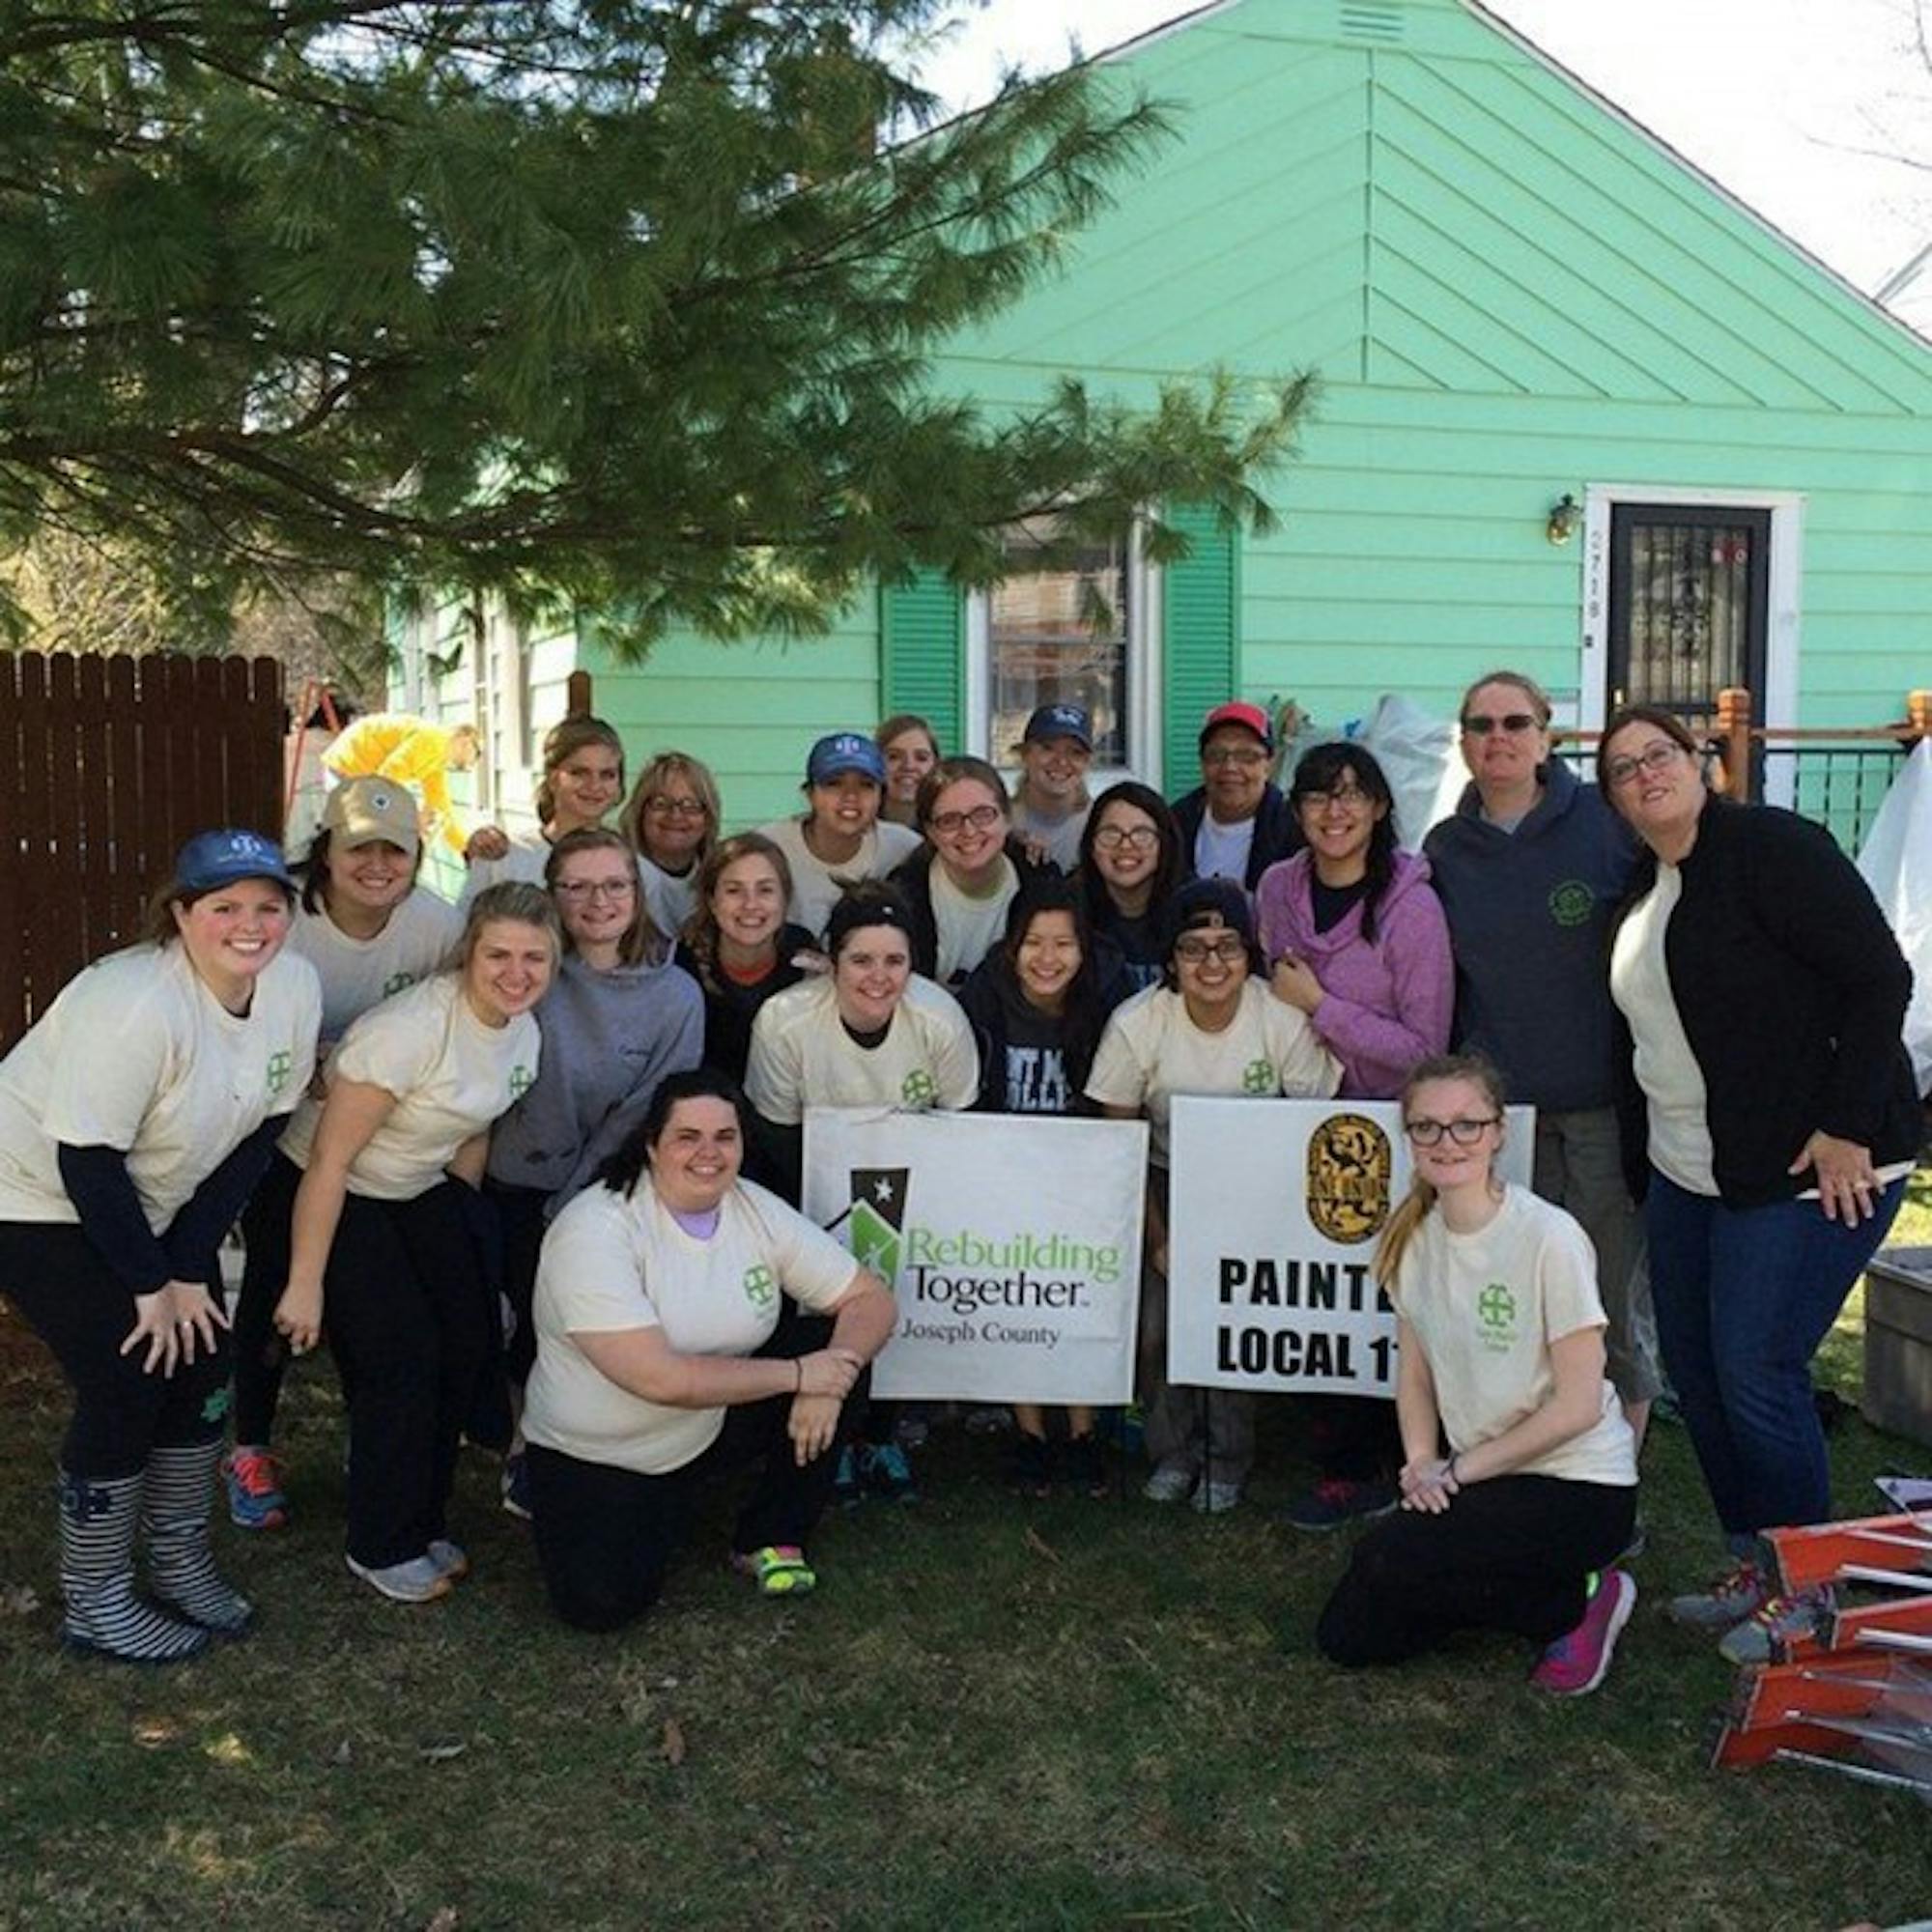 Saint Mary's students participate in Rebuilding Together, rehabing housing and working in the South Bend community.